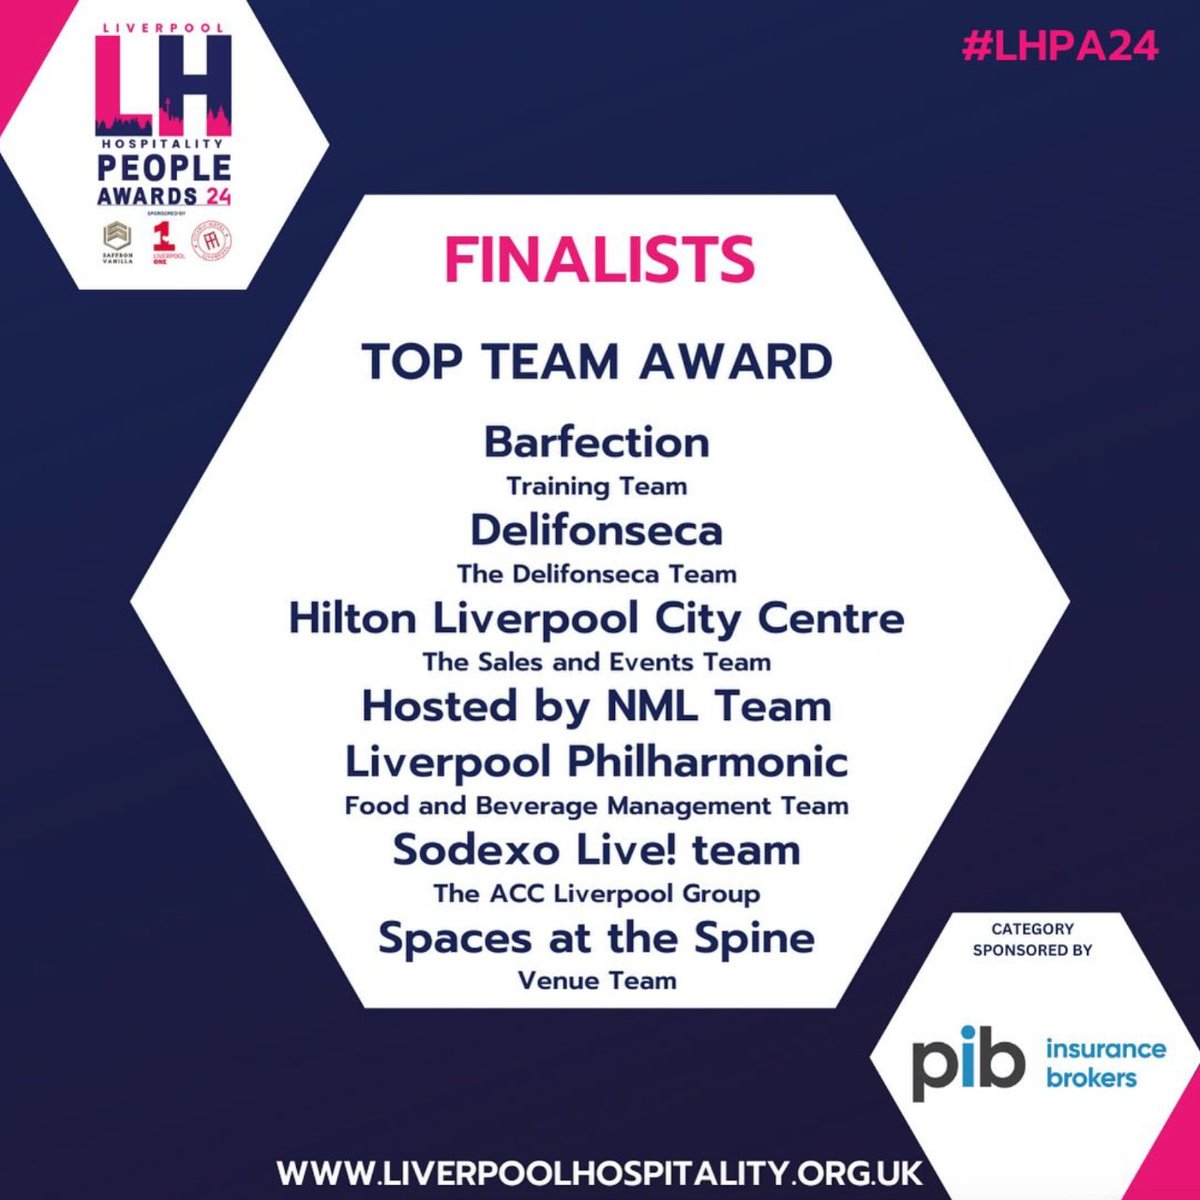 We're attending the Liverpool Hospitality People Awards tonight! ✨ We'll close the restaurant at 3pm, but don't worry, our Foodhall will be open until 7pm! 🥗

Fingers crossed 🤞and hopefully, some new additions to our trophy shelf! 🤩 #TeamEffort #LiverpoolHospitalityAwards